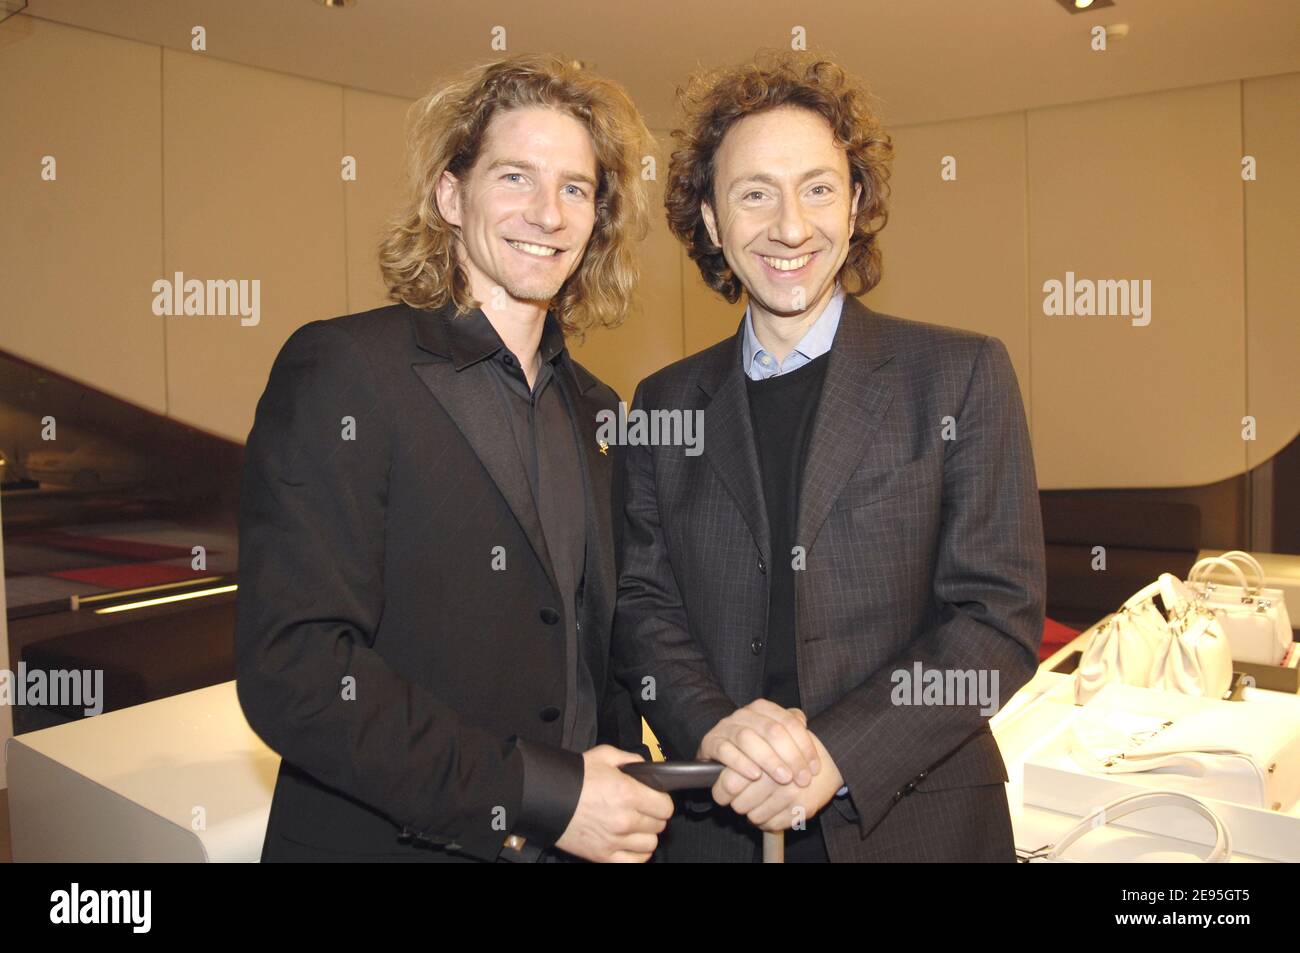 French former olympic champion Gwendal Peizerat and French TV presenter  Stephane Bern attend the Lancel store opening party on the Champs Elysees,  in Paris, France, on January 26, 2006. Photo by Nicolas